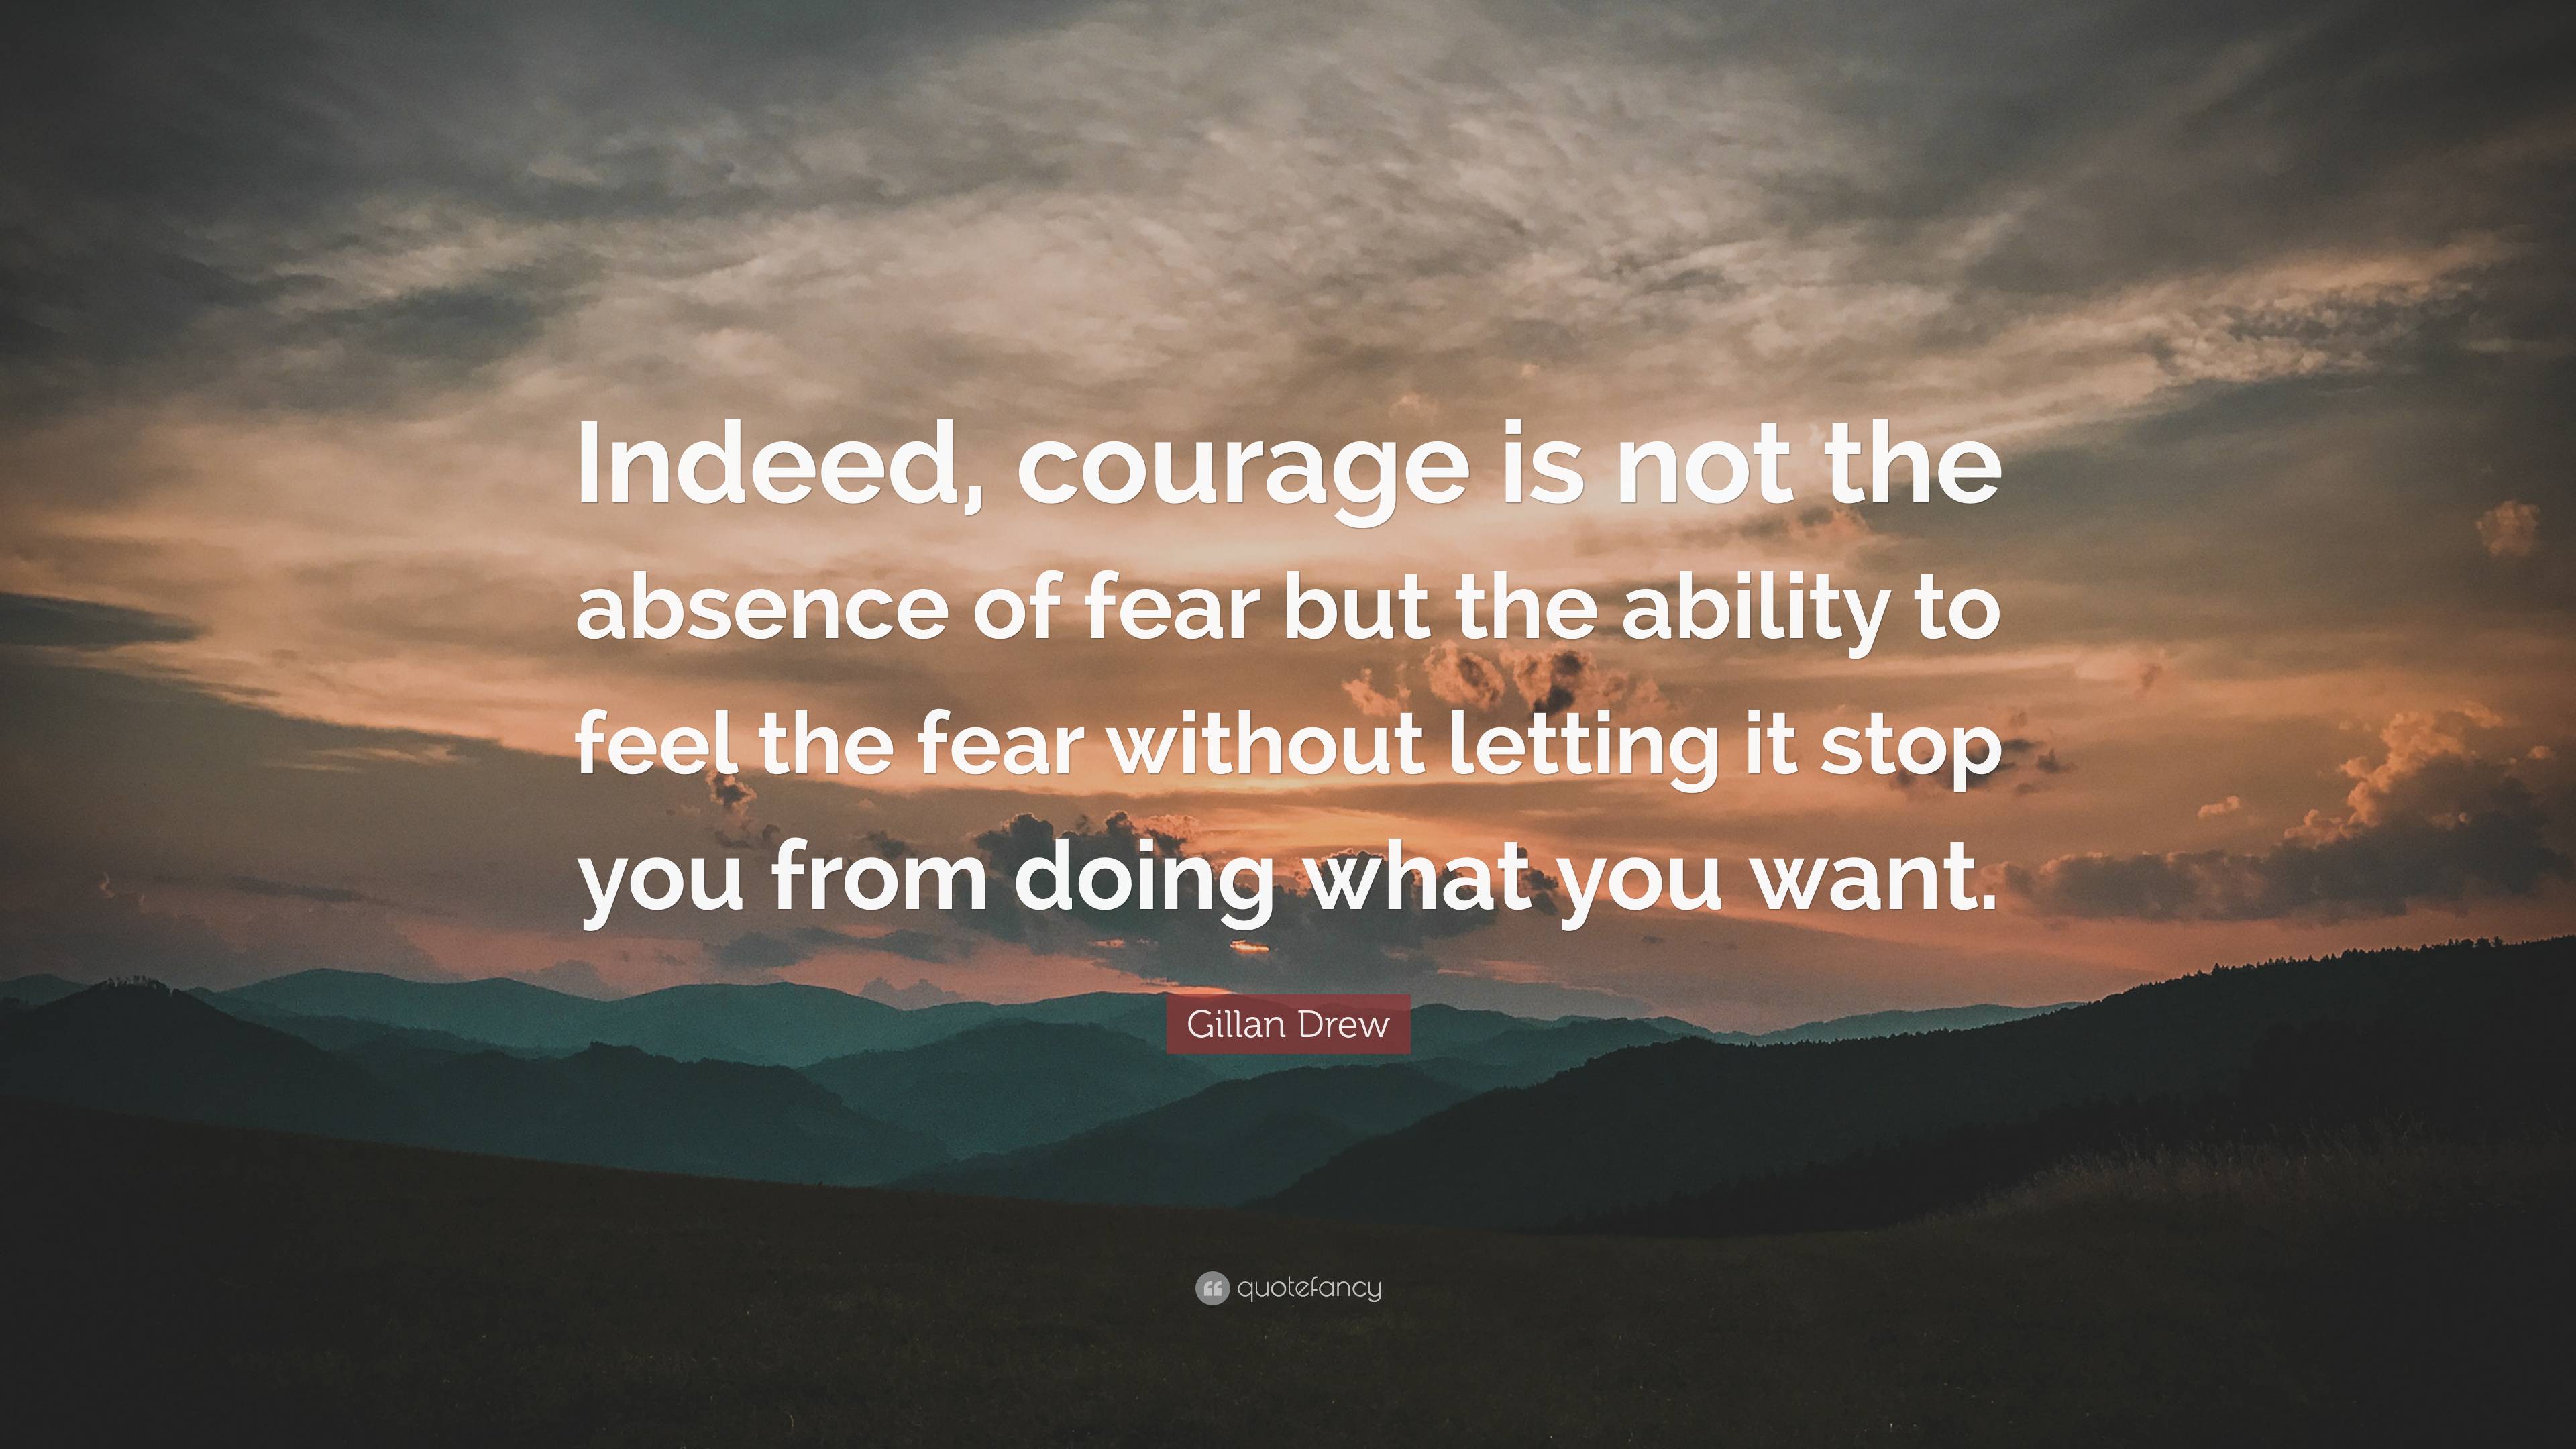 Gillan Drew Quote: “Indeed, courage is not the absence of fear but the ...